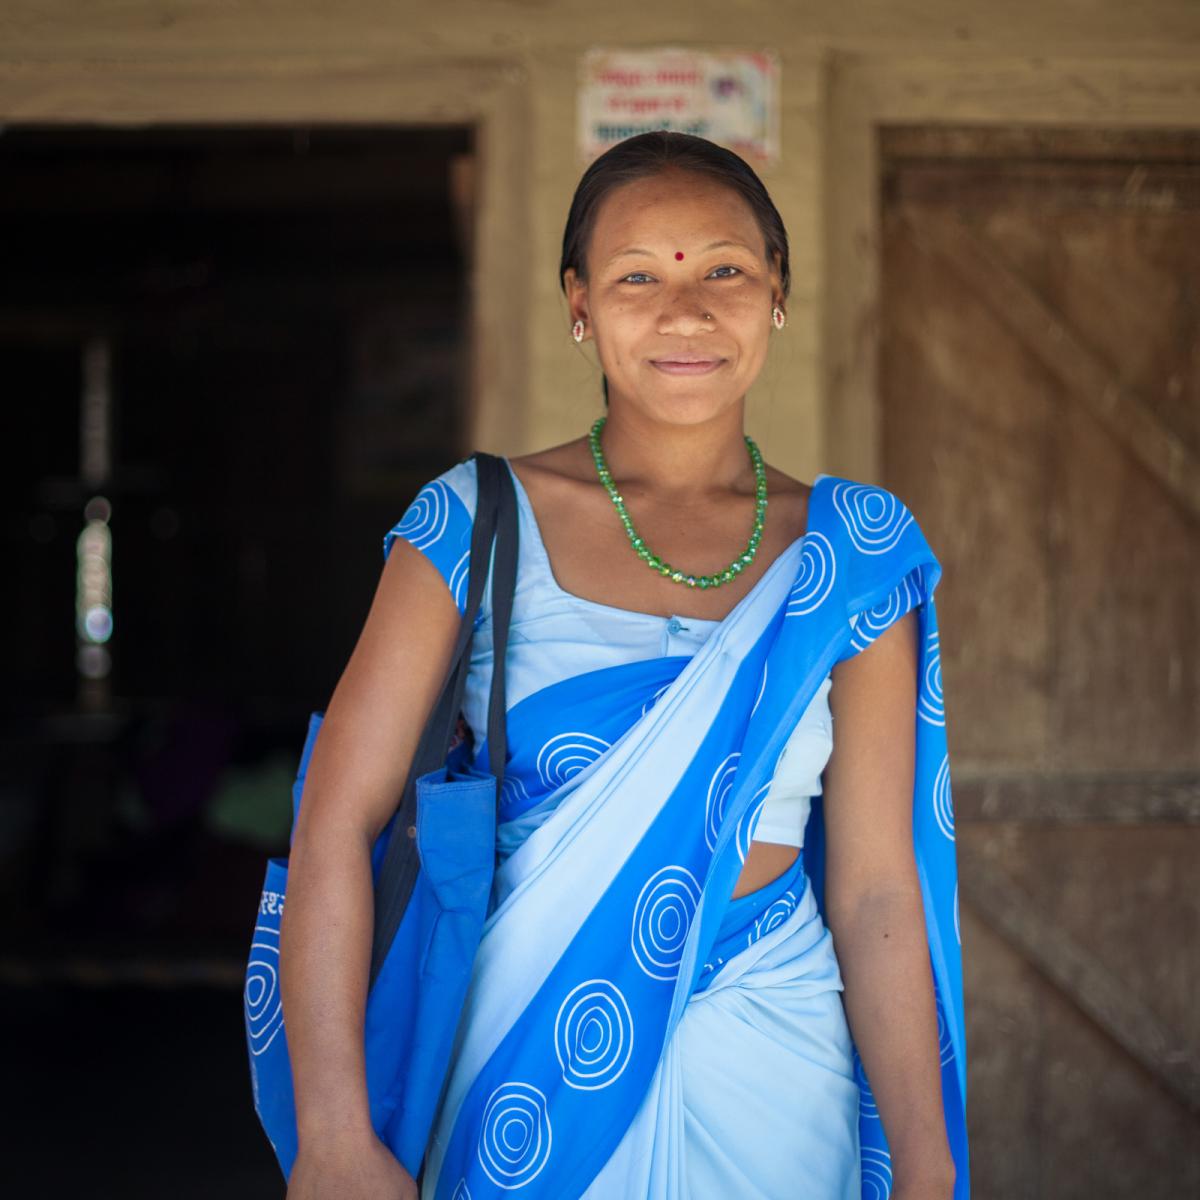 Smiling woman in a blue sari.